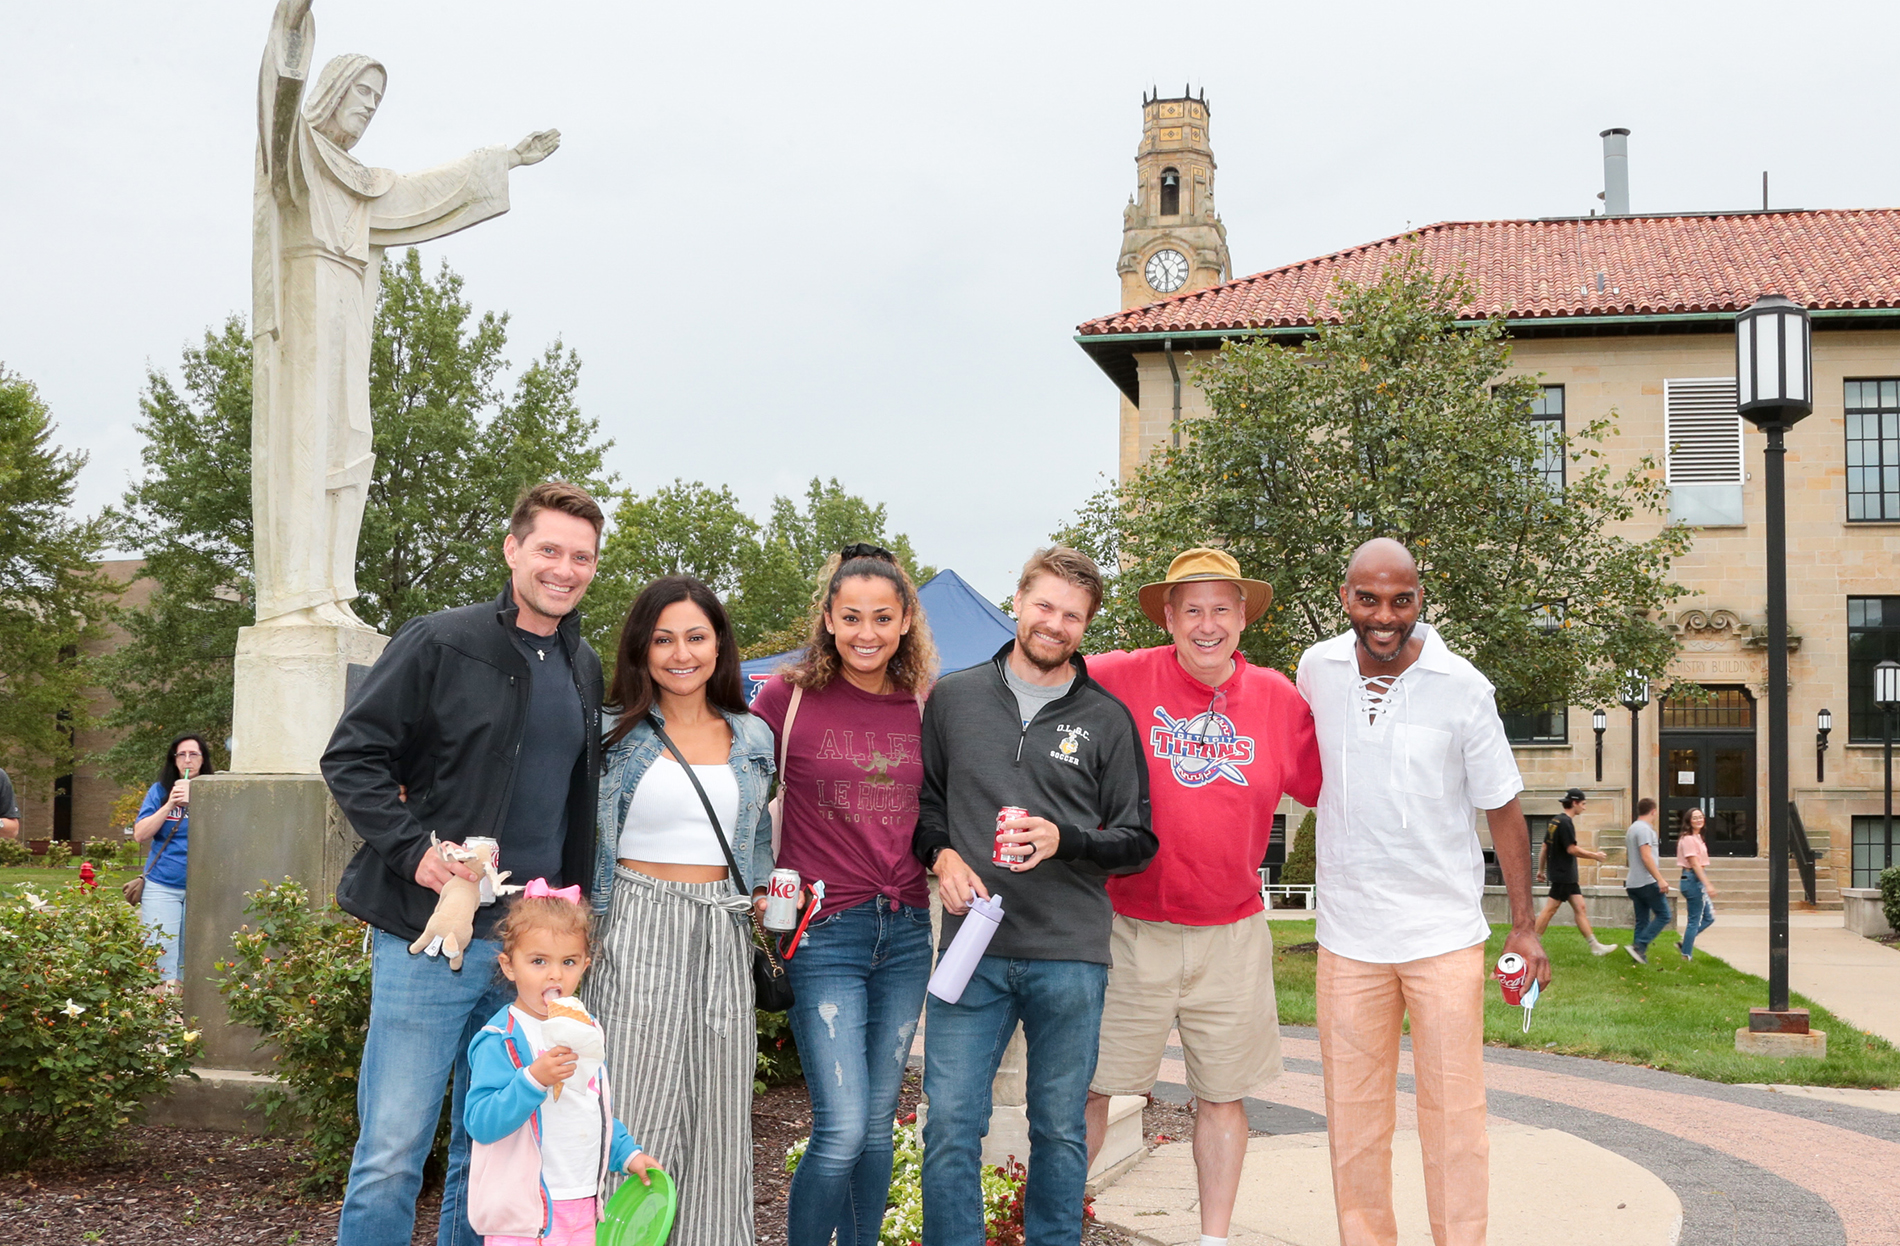 A group of adults and one child pose for a photo in front of Detroit Mercy's Jesus statue. In the background, the clocktower, buildings and other people are visible.